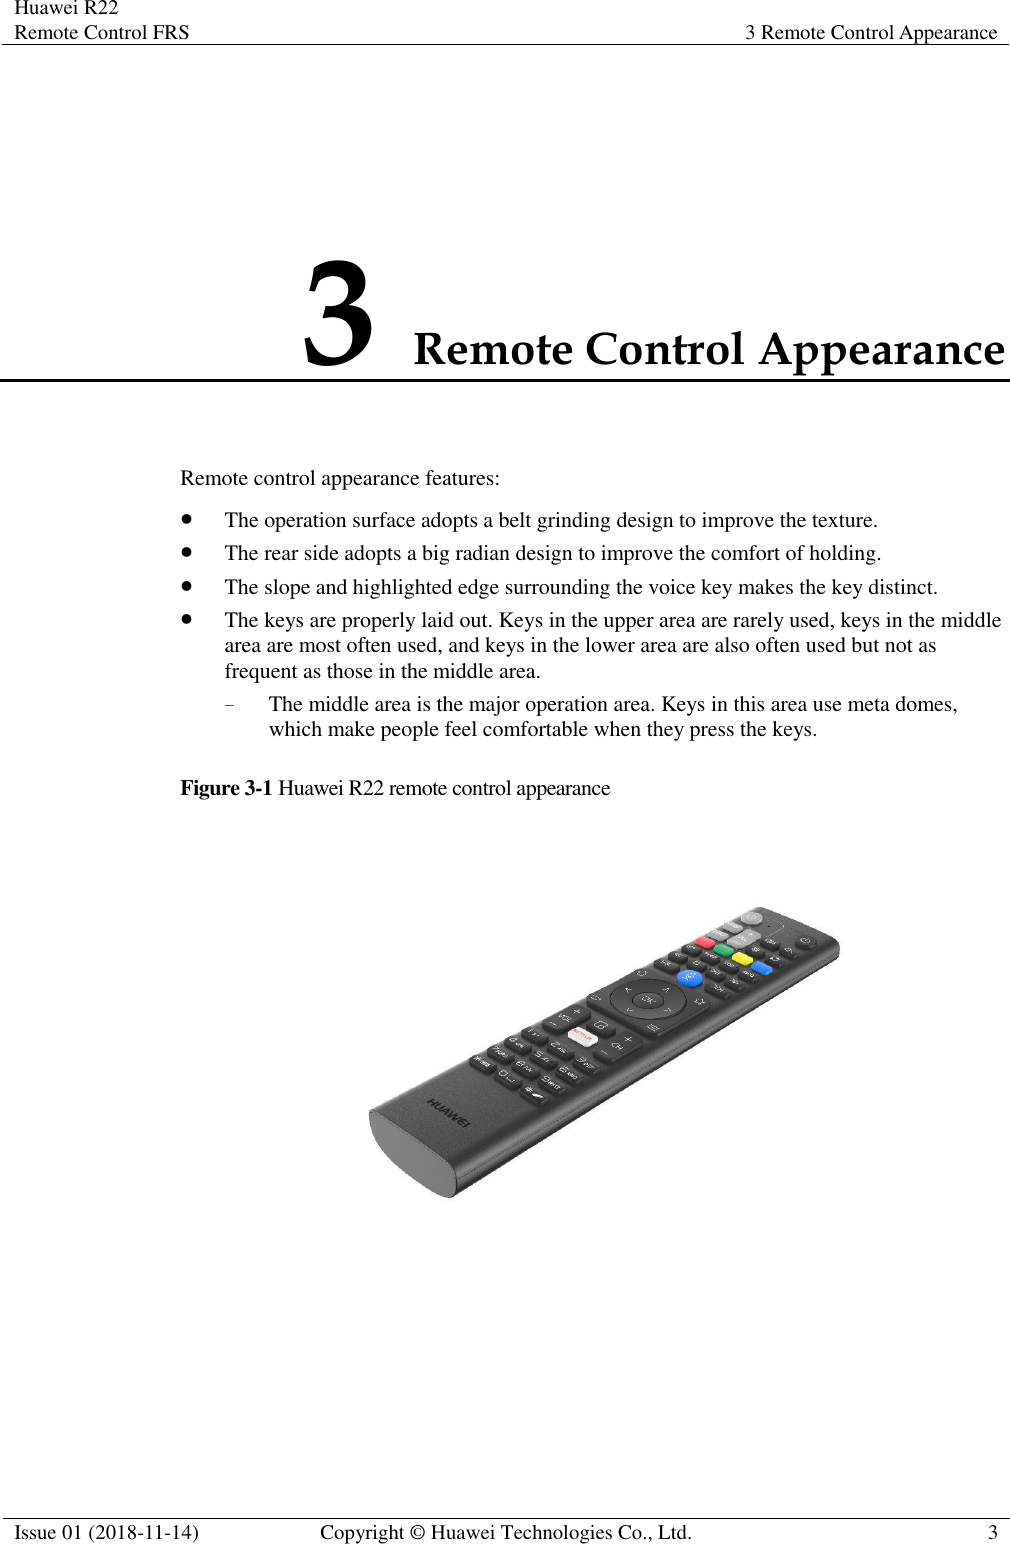 Huawei R22 Remote Control FRS 3 Remote Control Appearance  Issue 01 (2018-11-14) Copyright © Huawei Technologies Co., Ltd. 3  3 Remote Control Appearance Remote control appearance features: ⚫ The operation surface adopts a belt grinding design to improve the texture. ⚫ The rear side adopts a big radian design to improve the comfort of holding. ⚫ The slope and highlighted edge surrounding the voice key makes the key distinct. ⚫ The keys are properly laid out. Keys in the upper area are rarely used, keys in the middle area are most often used, and keys in the lower area are also often used but not as frequent as those in the middle area.   − The middle area is the major operation area. Keys in this area use meta domes, which make people feel comfortable when they press the keys. Figure 3-1 Huawei R22 remote control appearance  